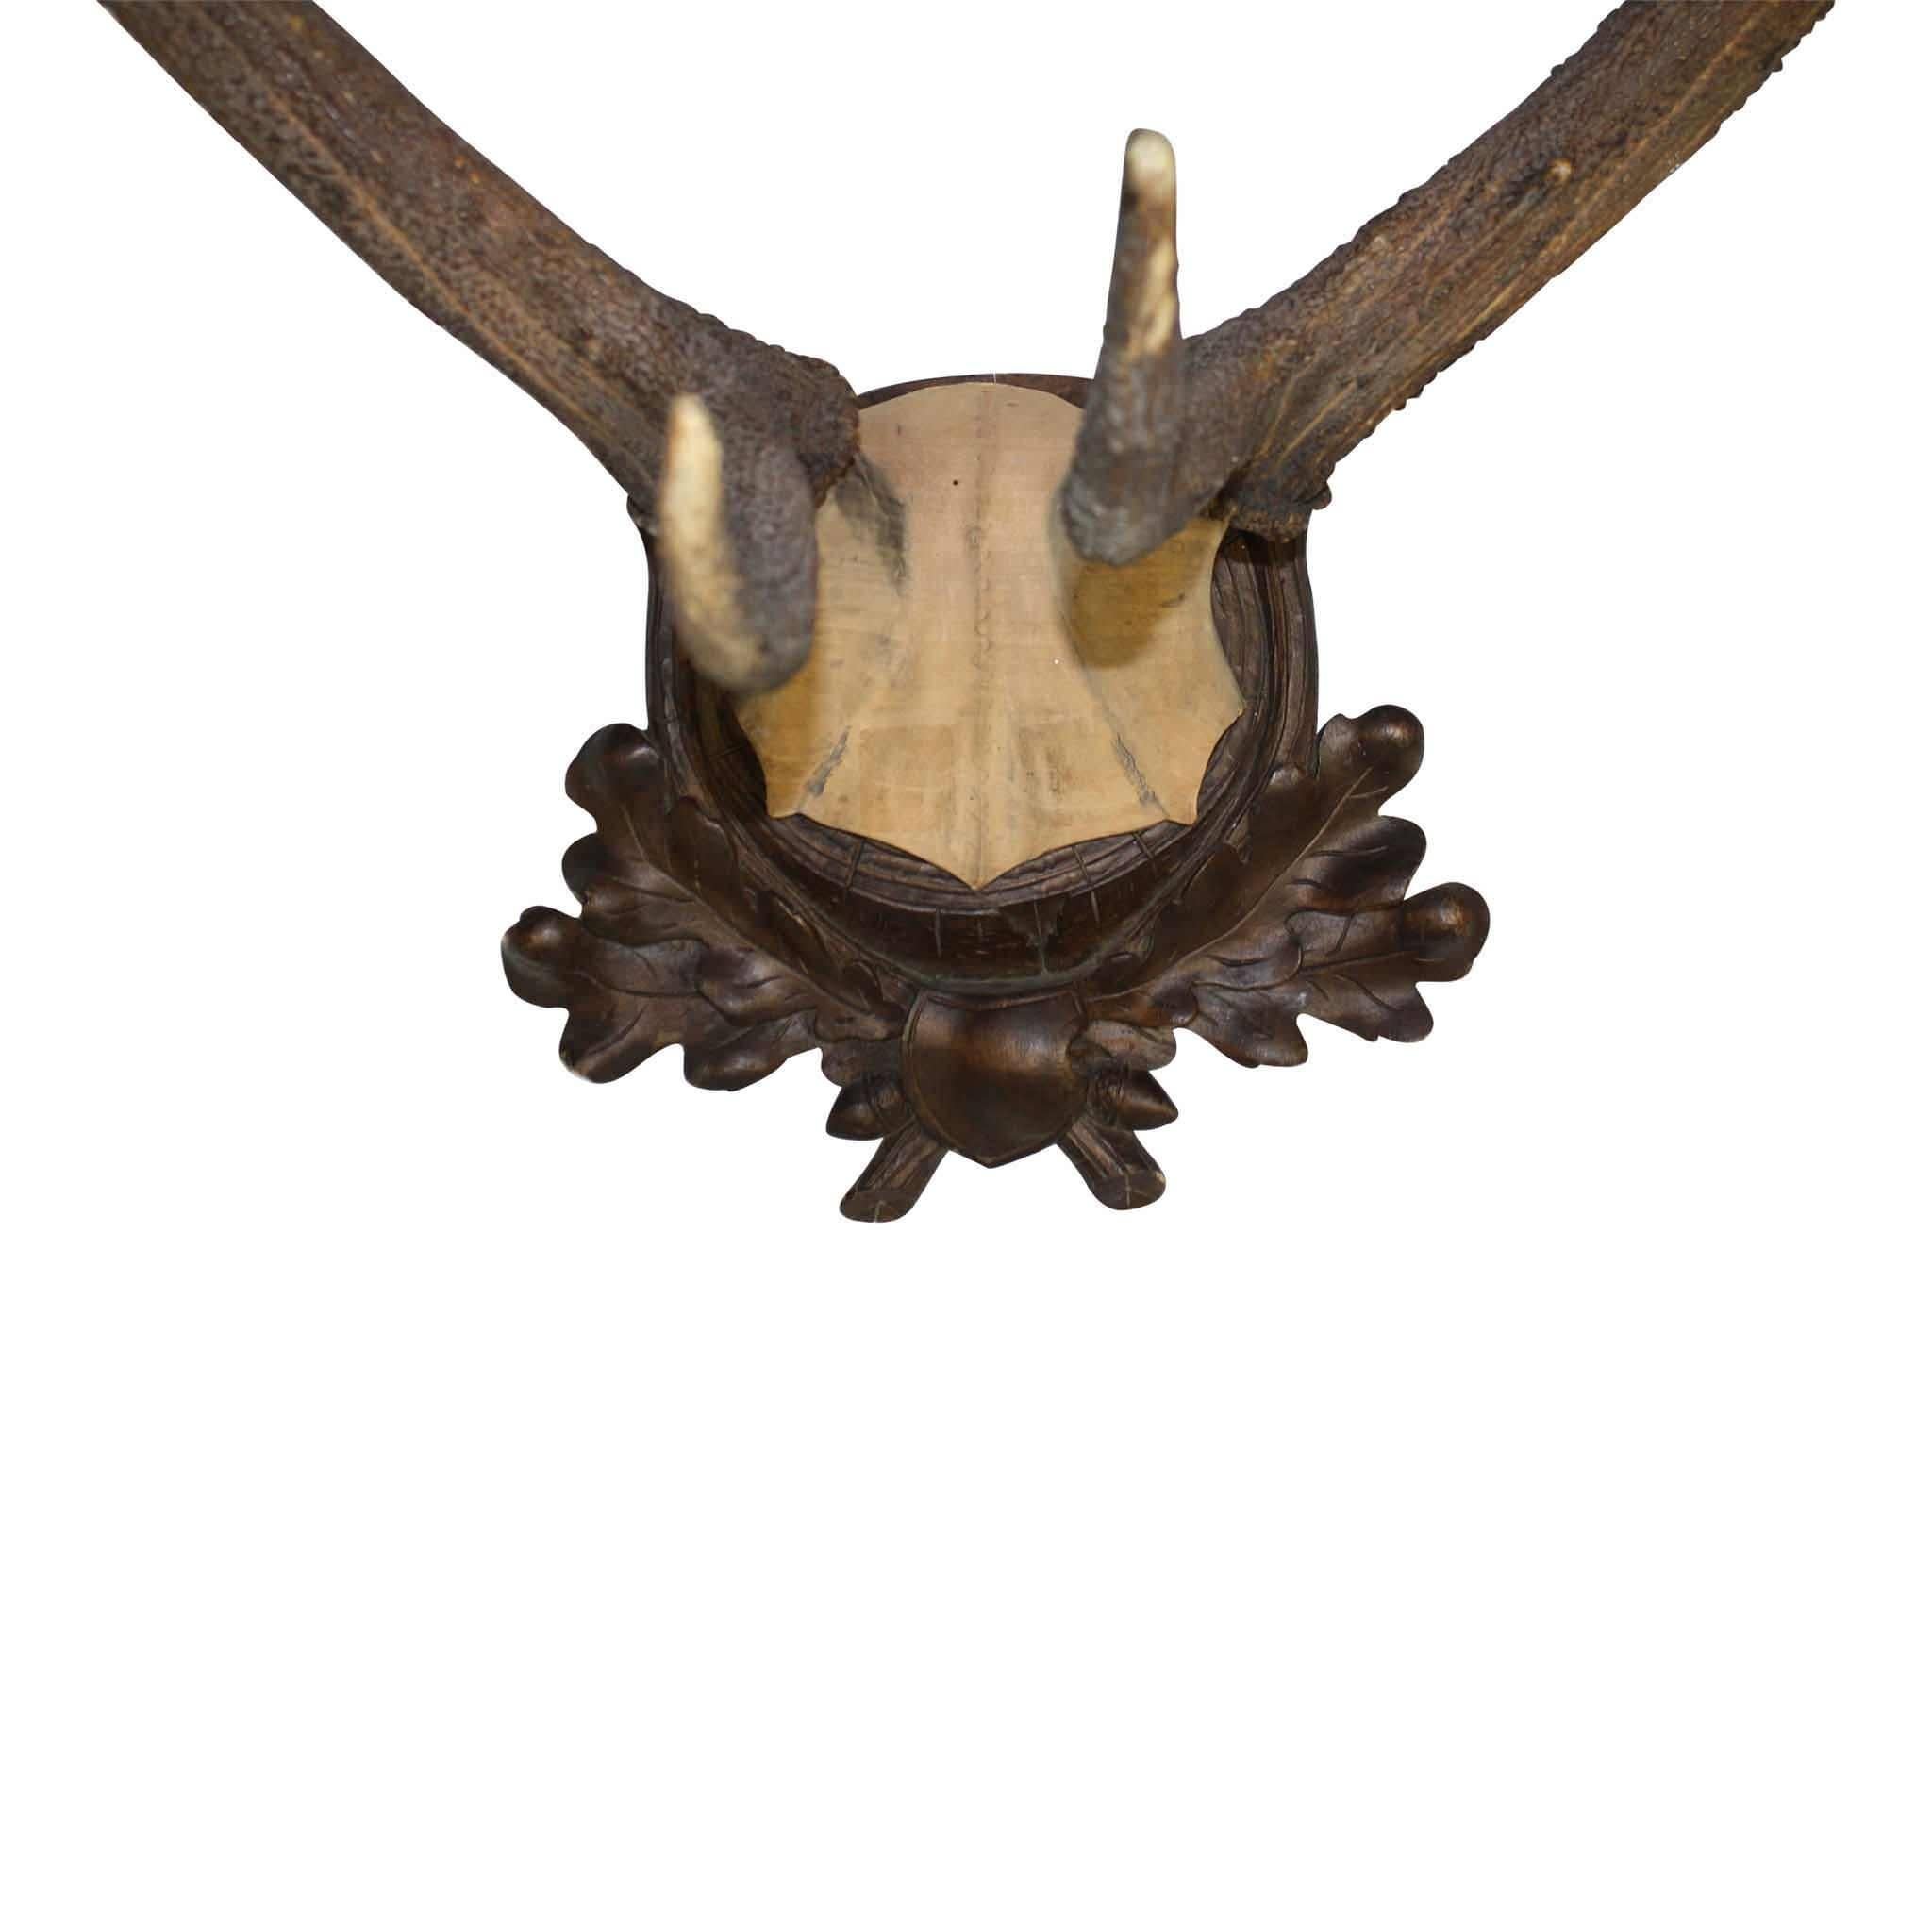 The crown of this beautifully symmetrical stag mount has a palm of three tines on each antler. Additionally, this ten point mount has tines on the lower beams. The wooden plaque and carved skull cap supporting the antlers measures 12